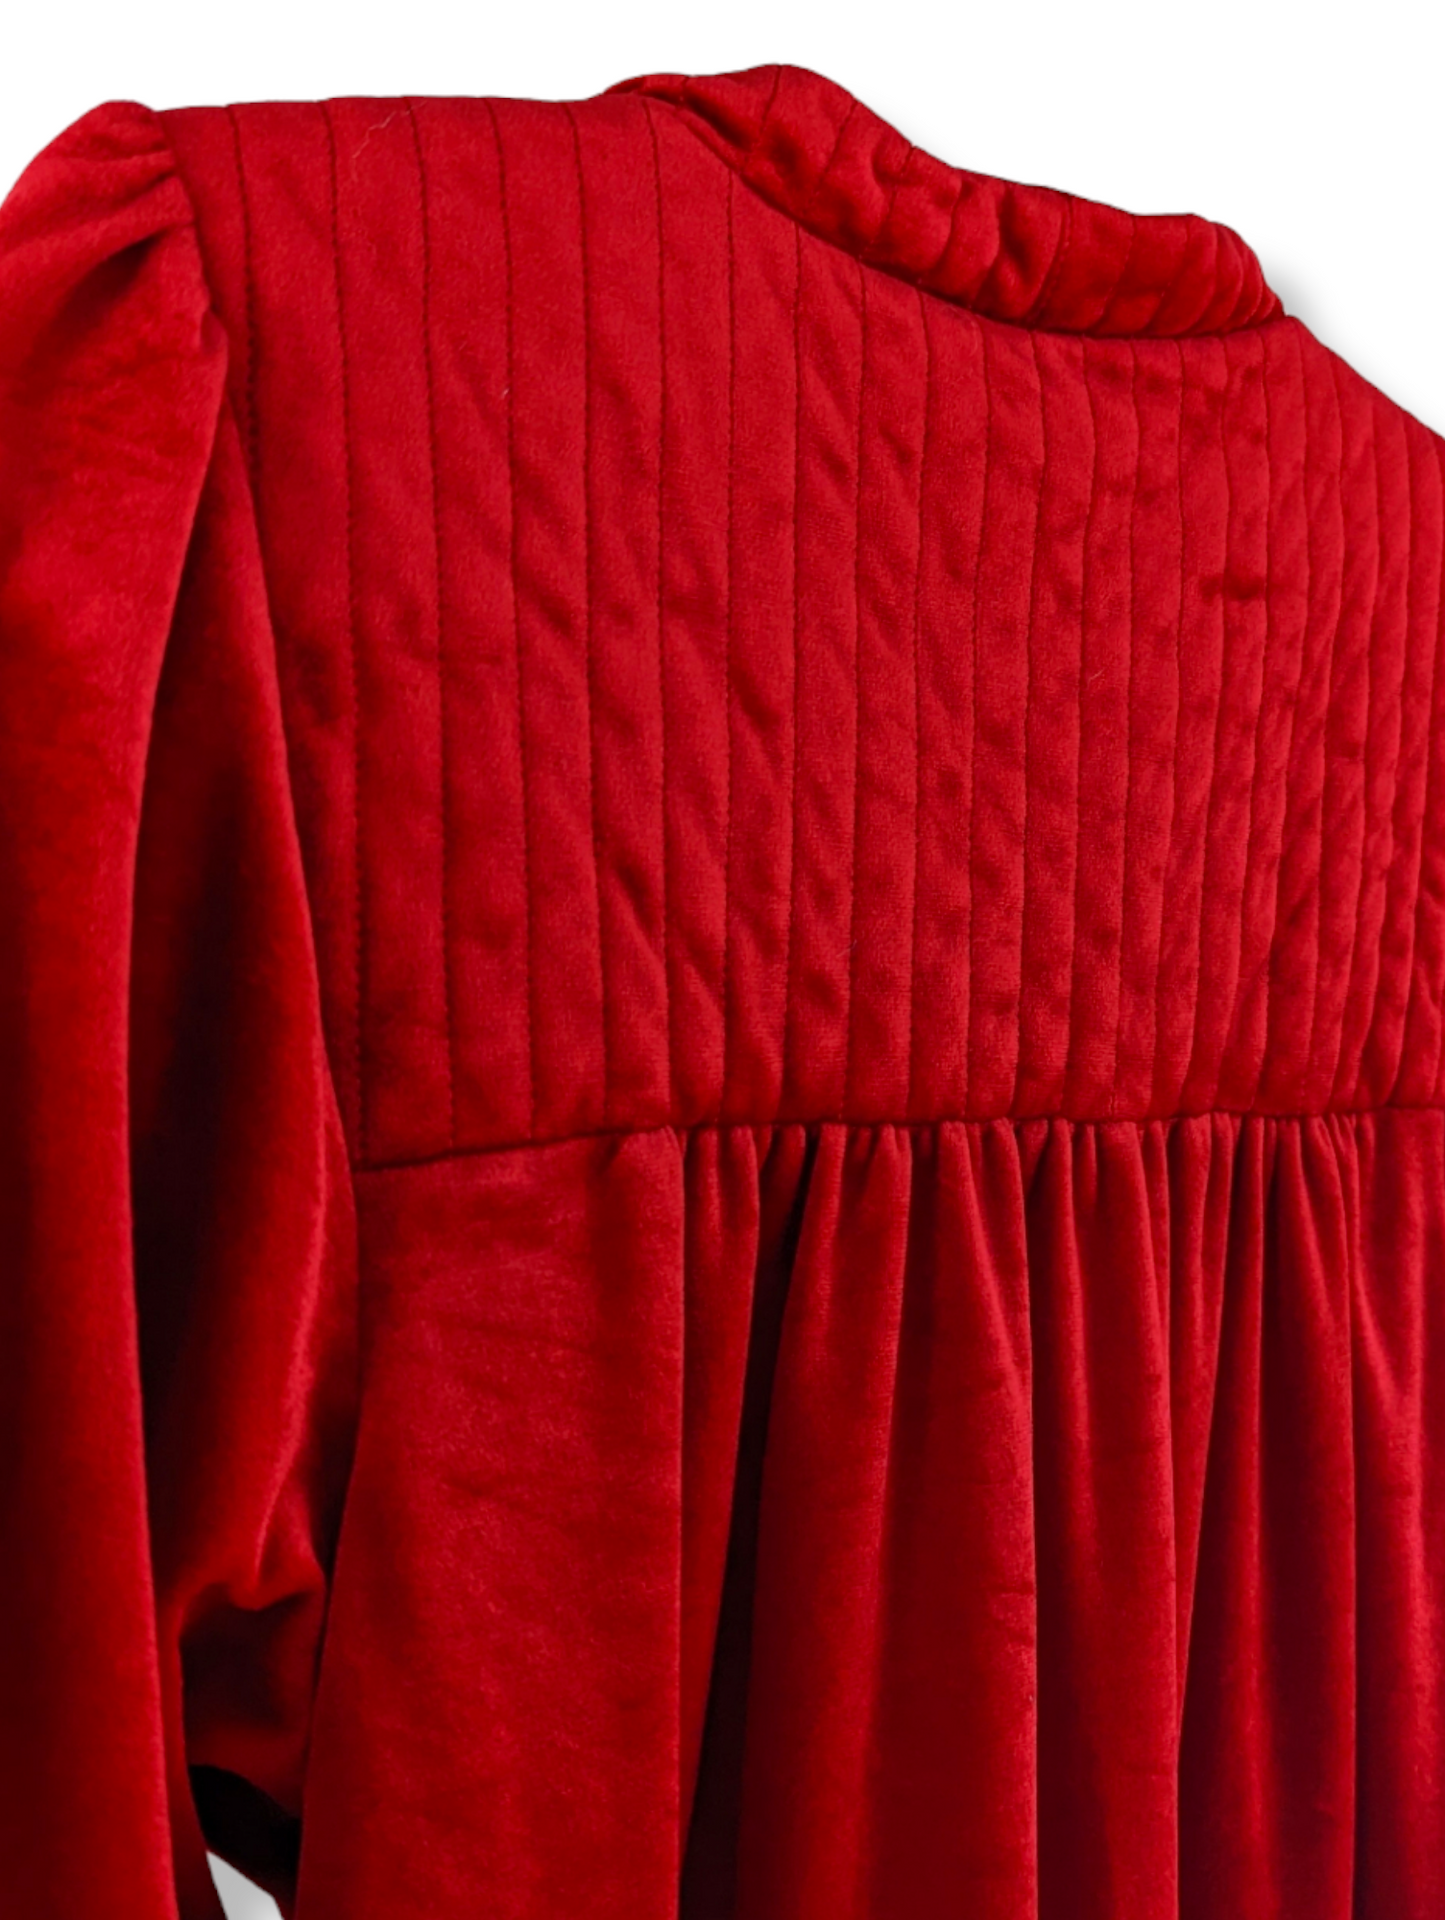 1980s Red Velvet Velour Quilted Robe Nightgown with Pockets and Puff Sleeves